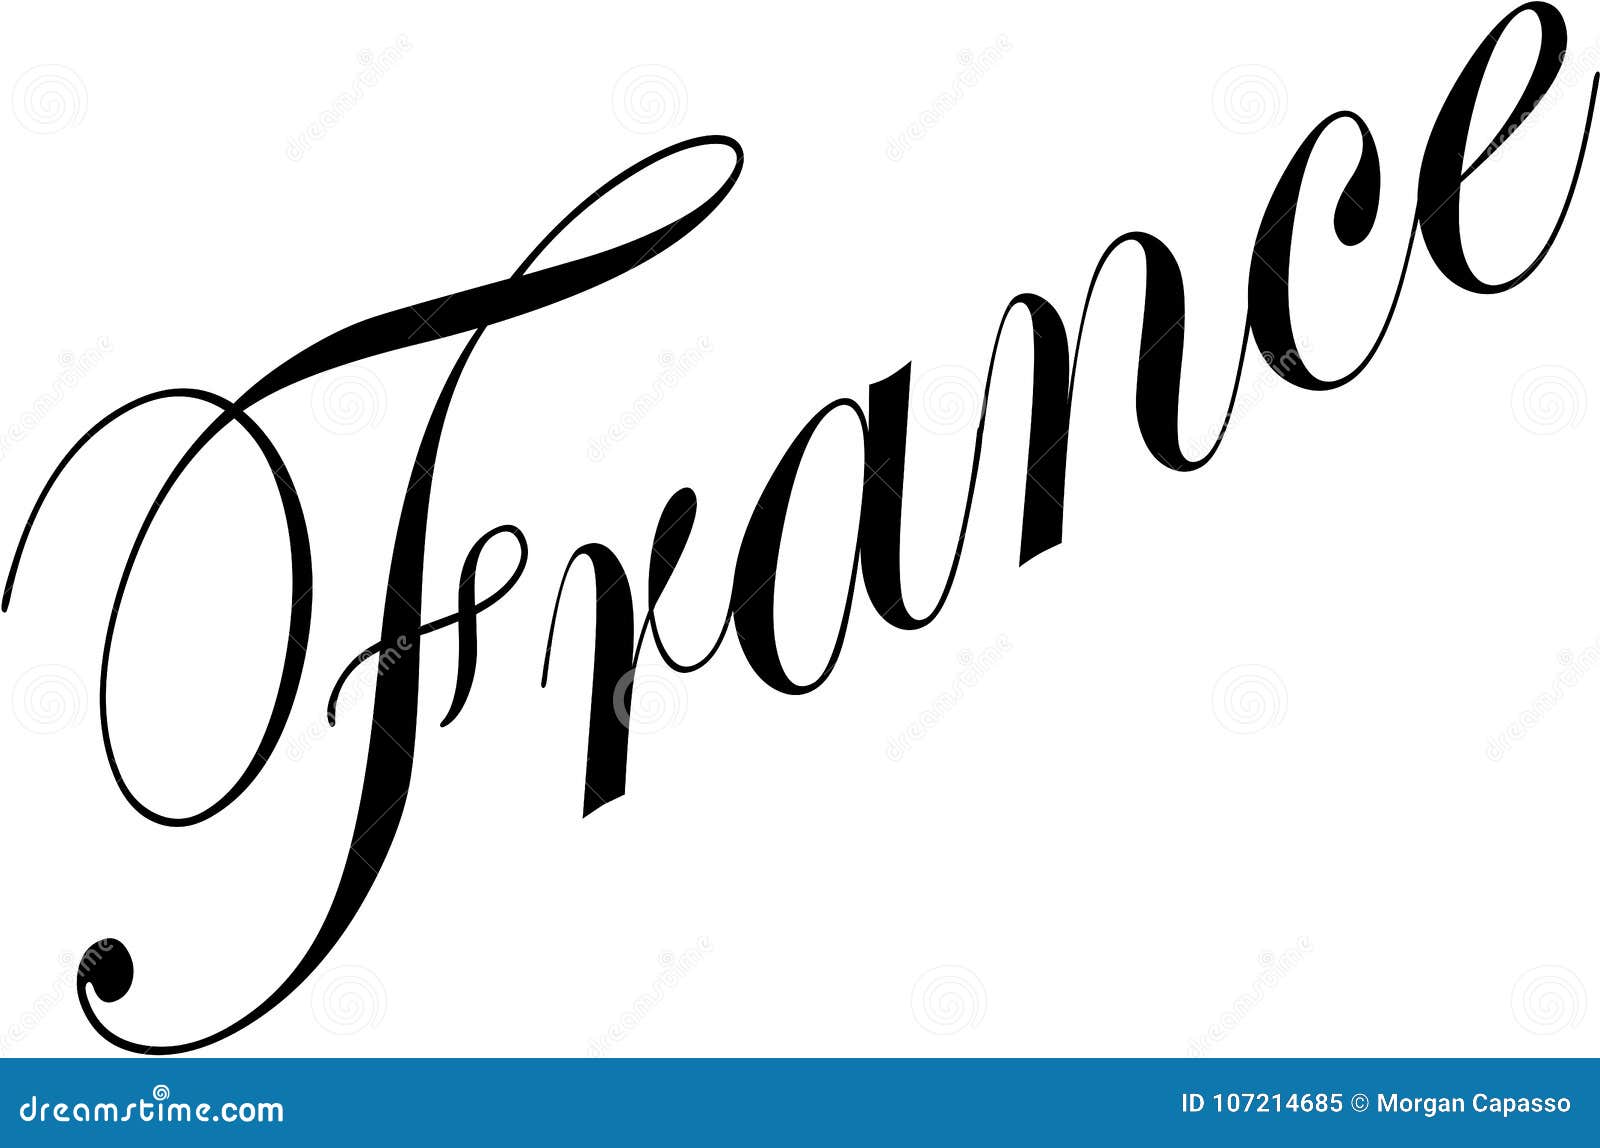 france text sign 